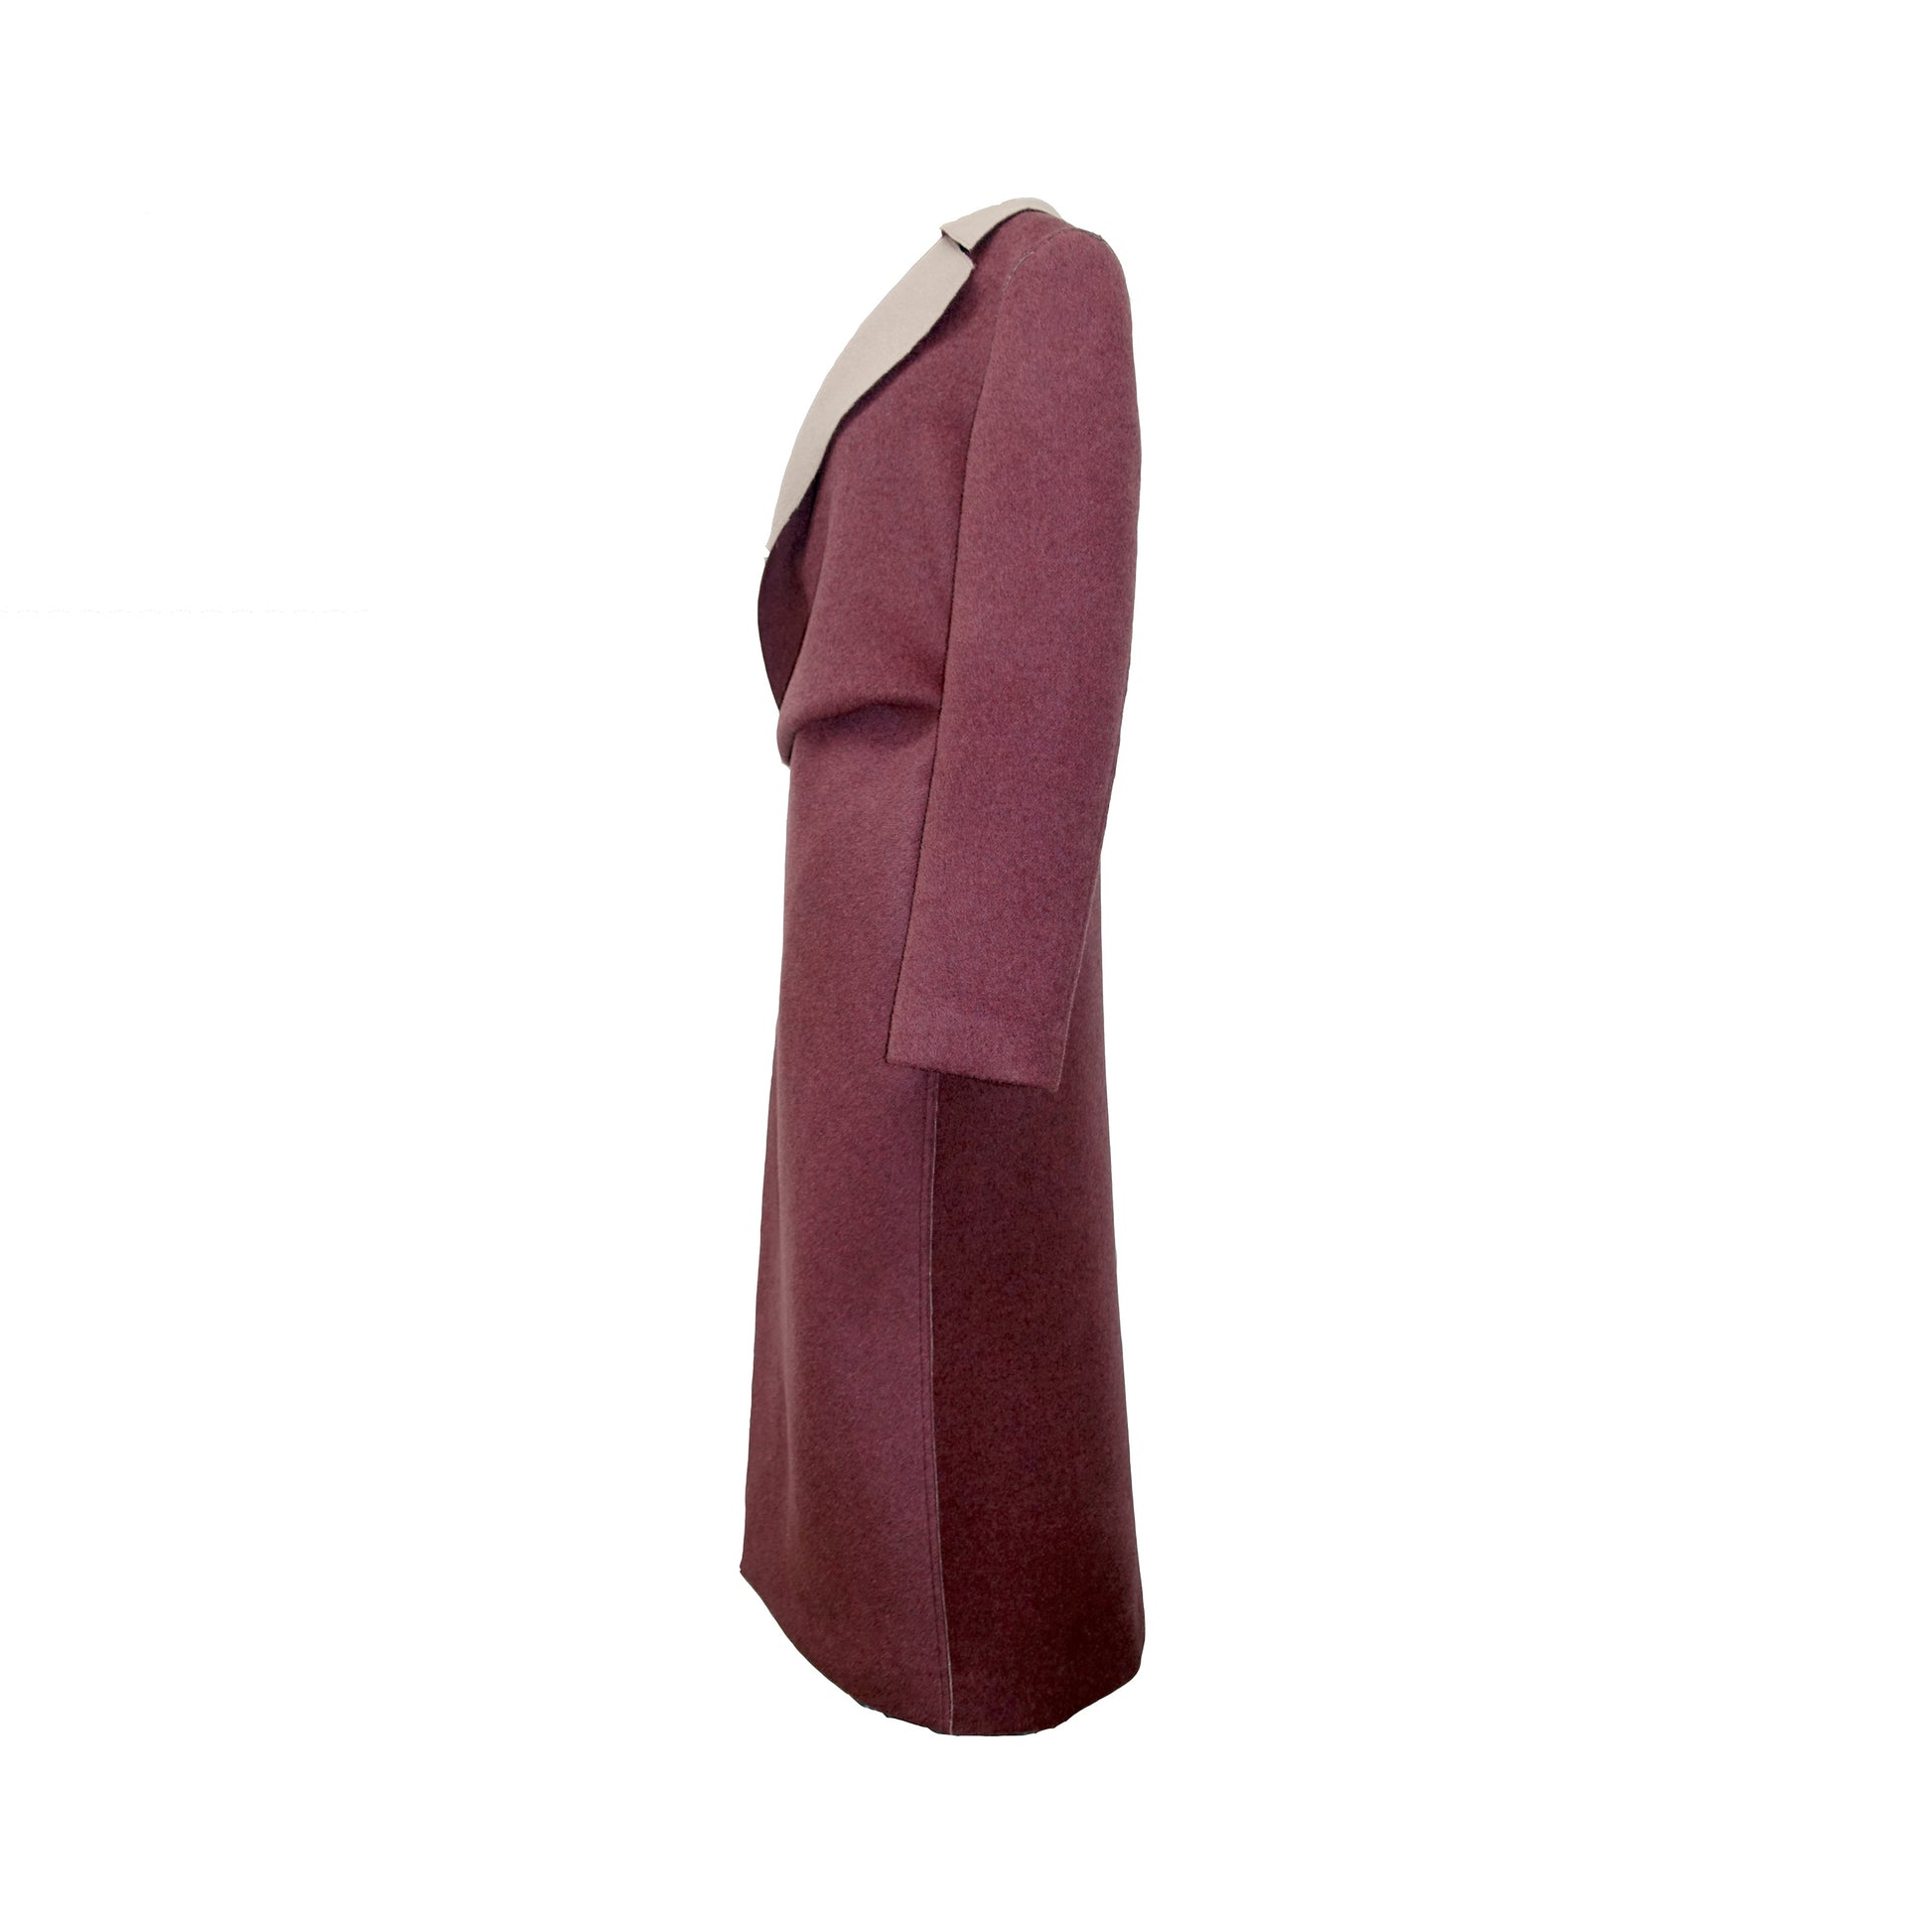 Side of tailored look double-face wool and cashmere blend raspberry pink coat